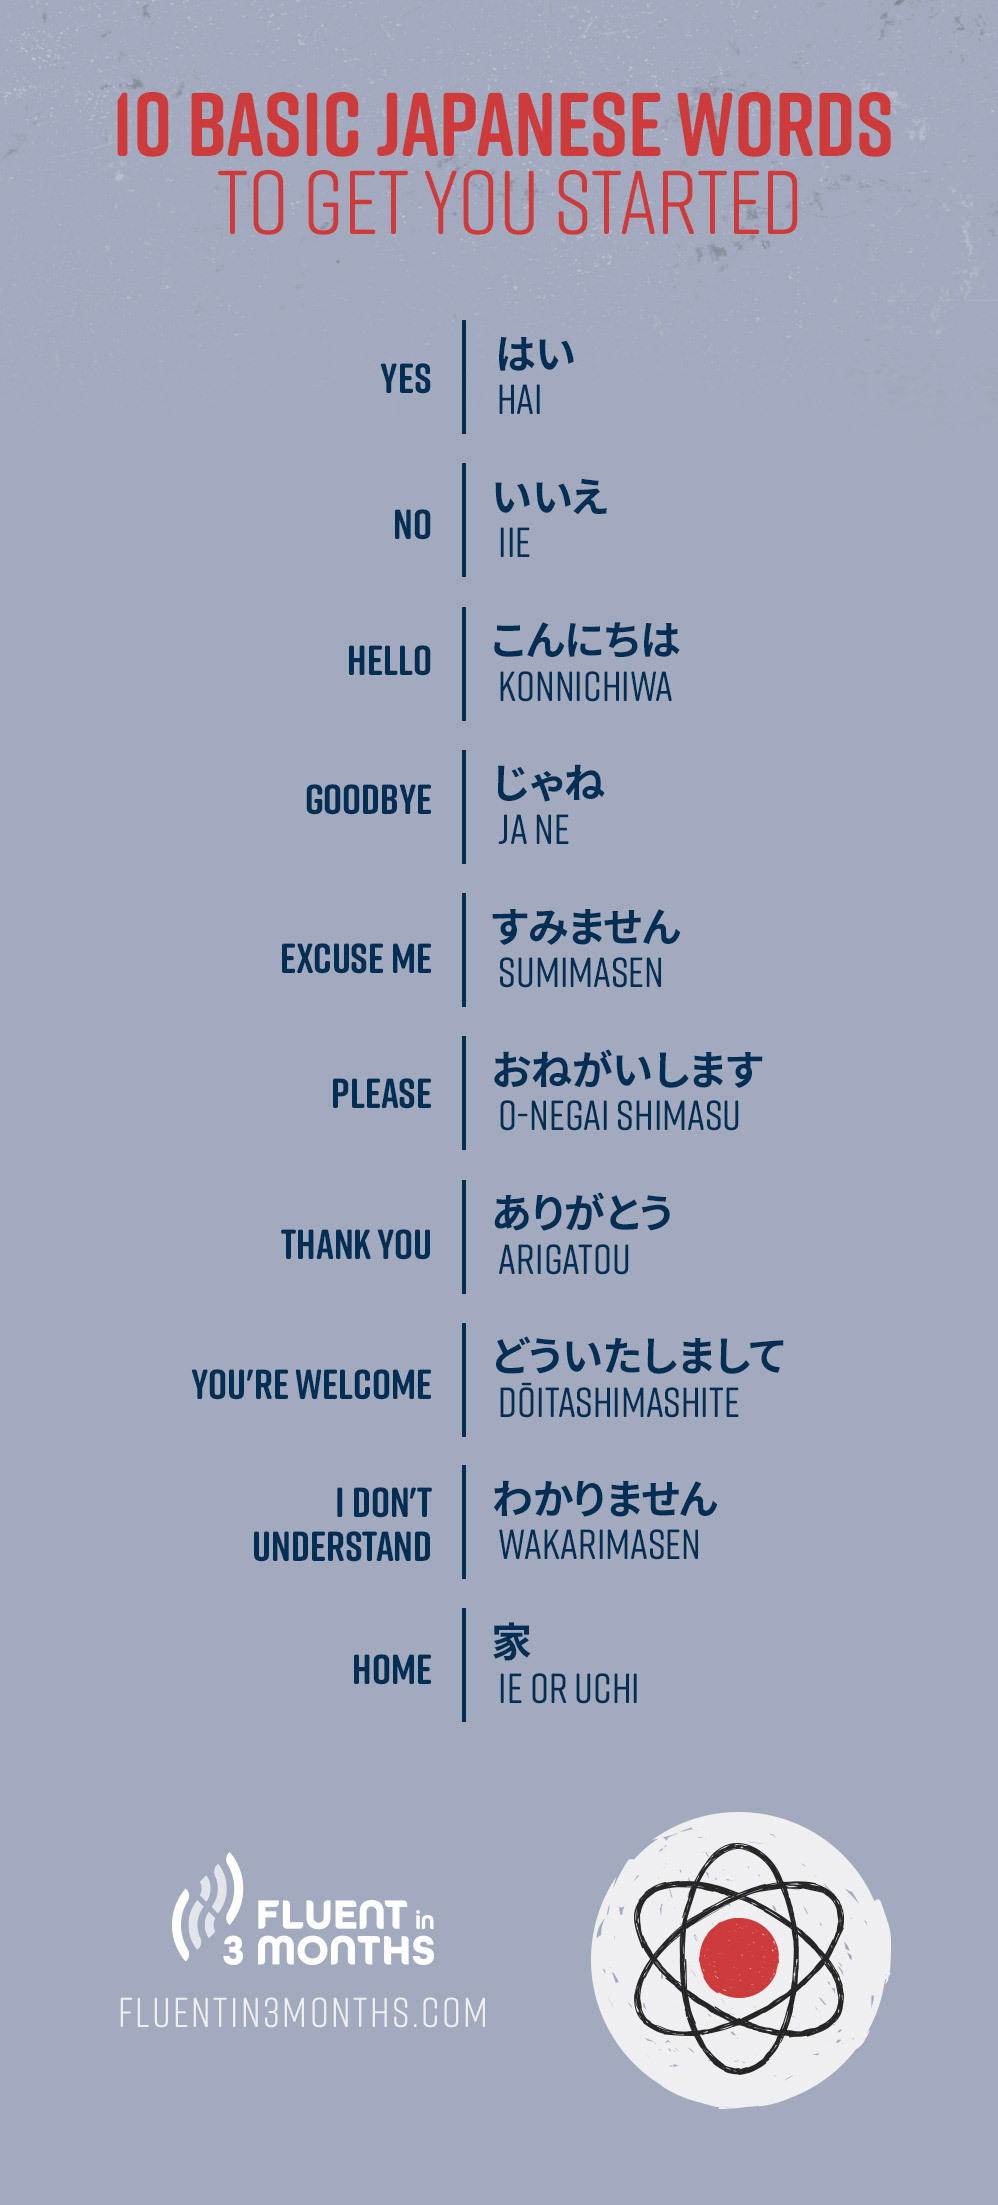 100 Basic Japanese Verbs All Learners Should Know